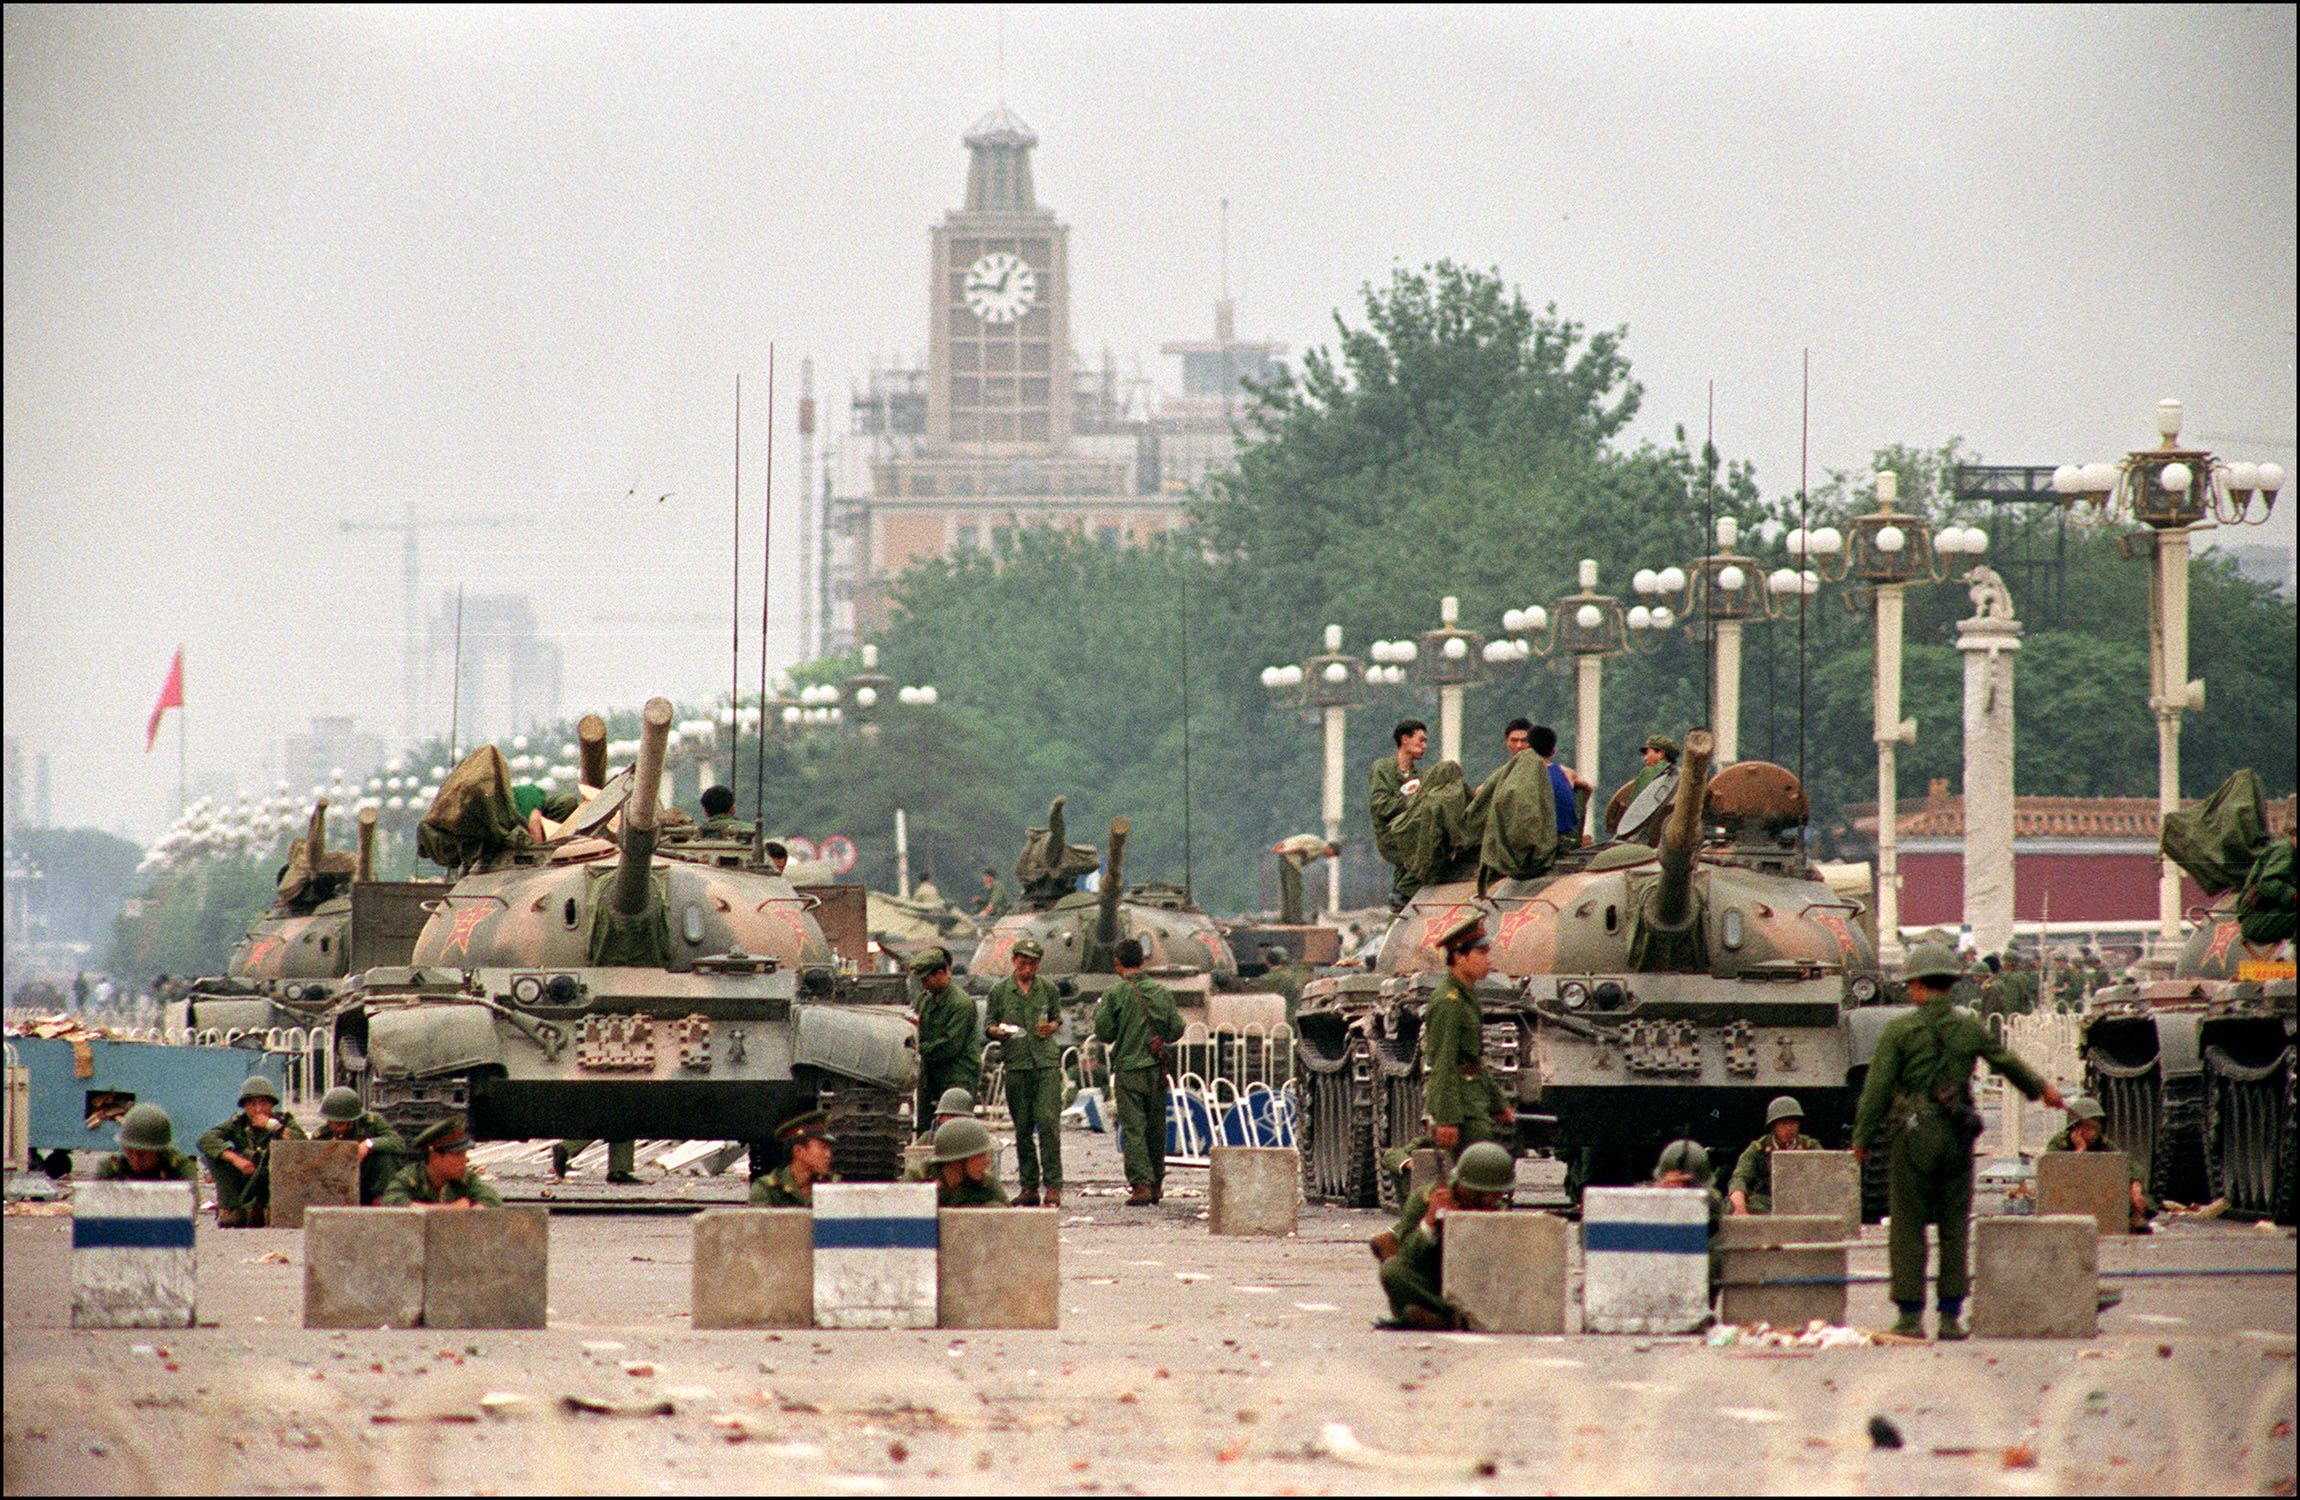 The People's Liberation Army  (PLA) tanks guard a